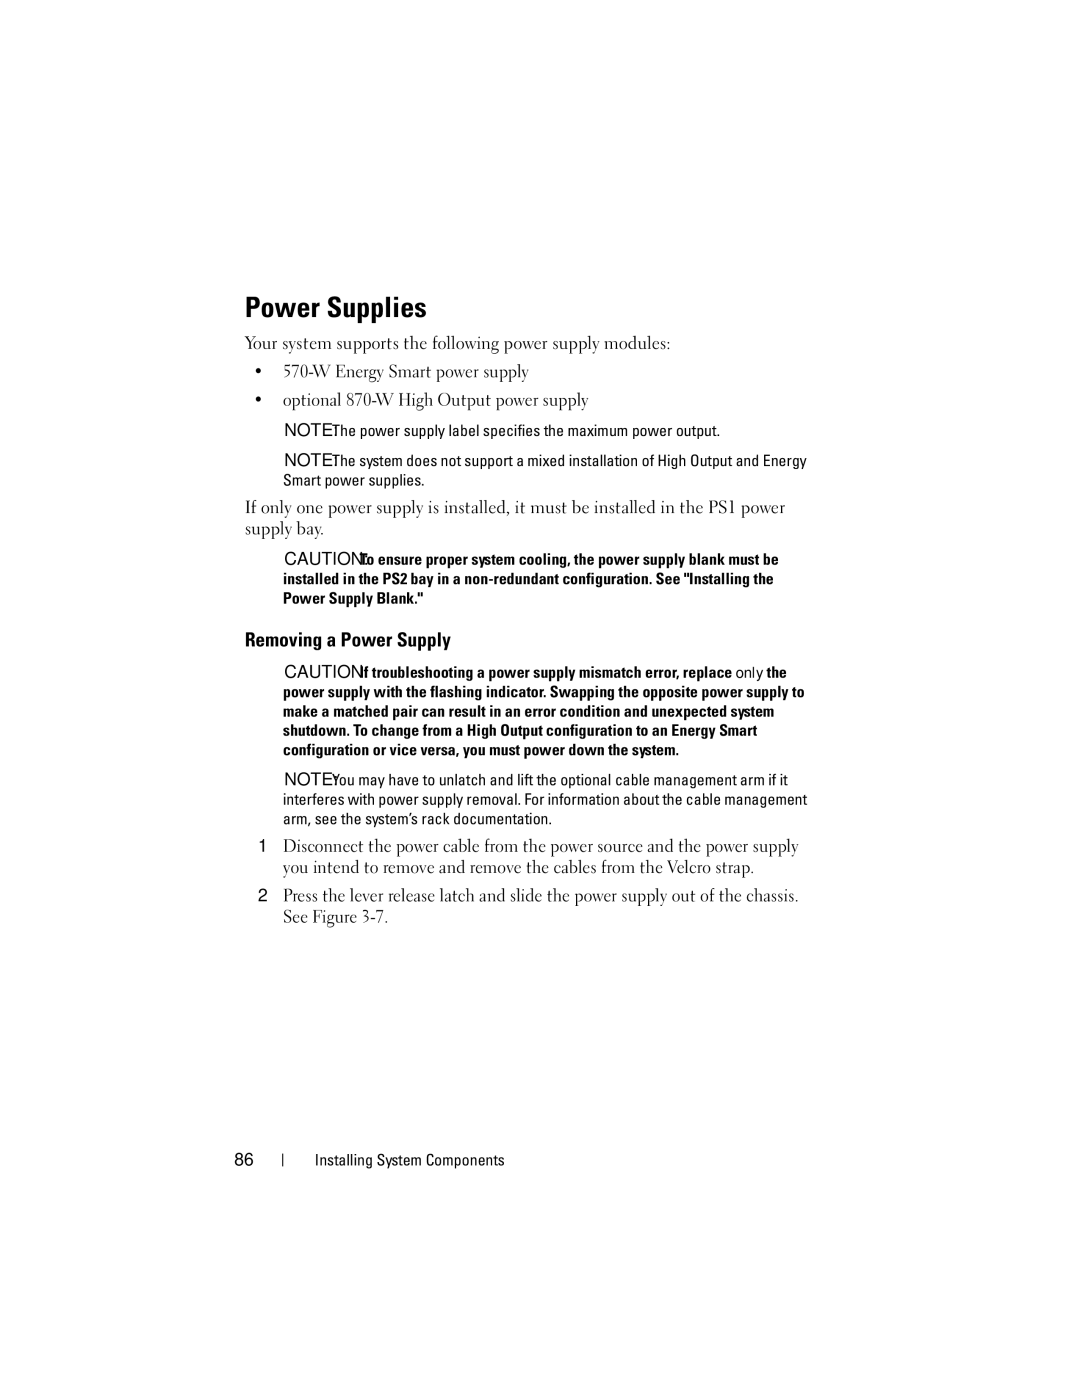 Dell R710 owner manual Power Supplies, Removing a Power Supply 